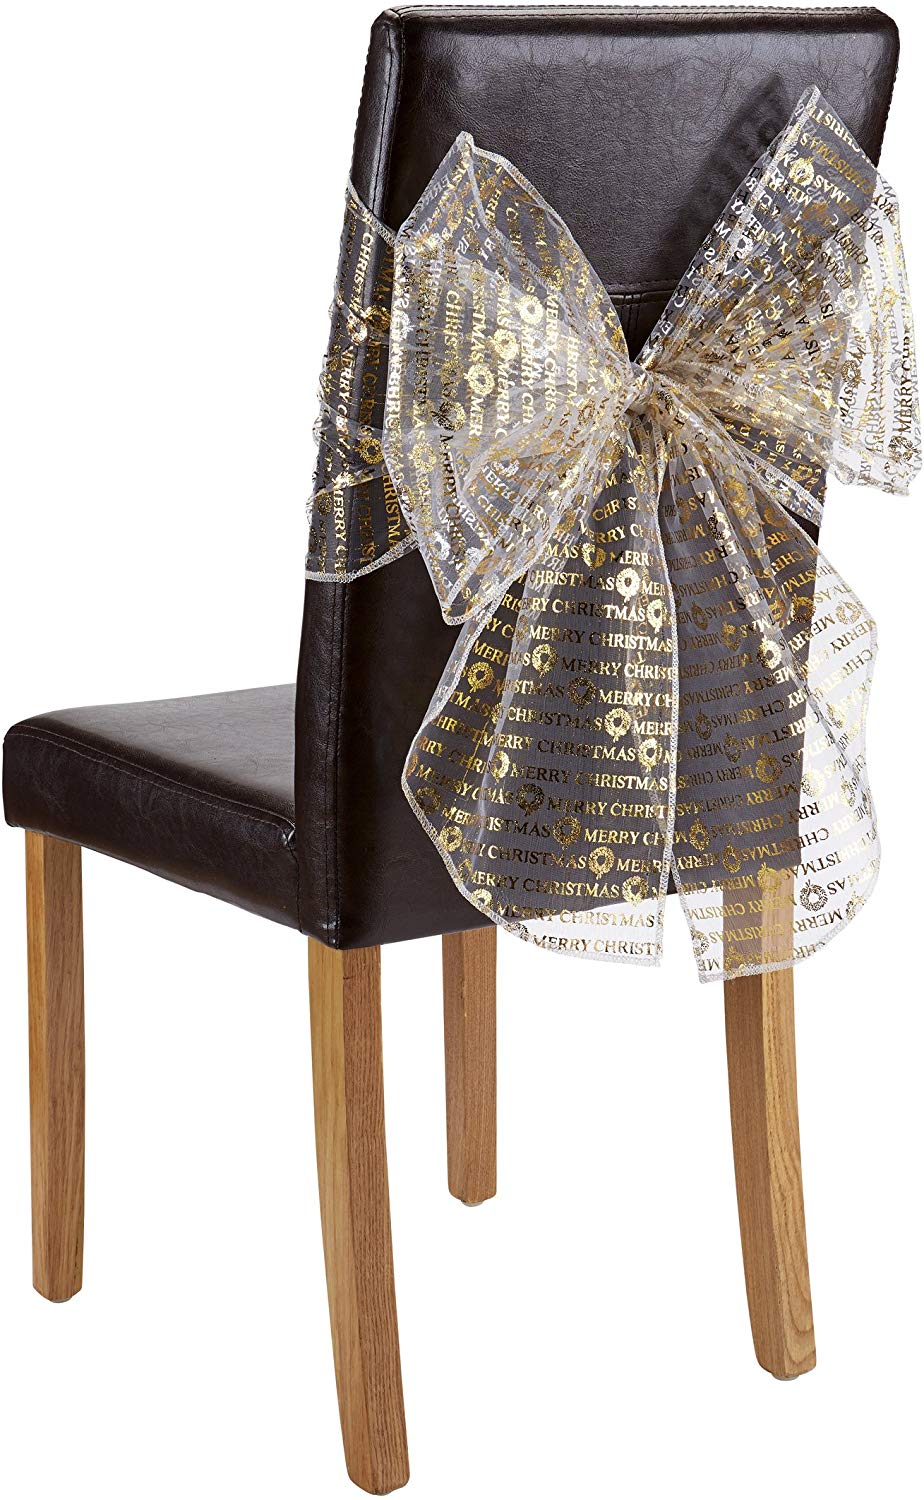 Chair Bows Merry Christmas Gold On White - Pack Of 2, Festive Christmas Party Decorative Range